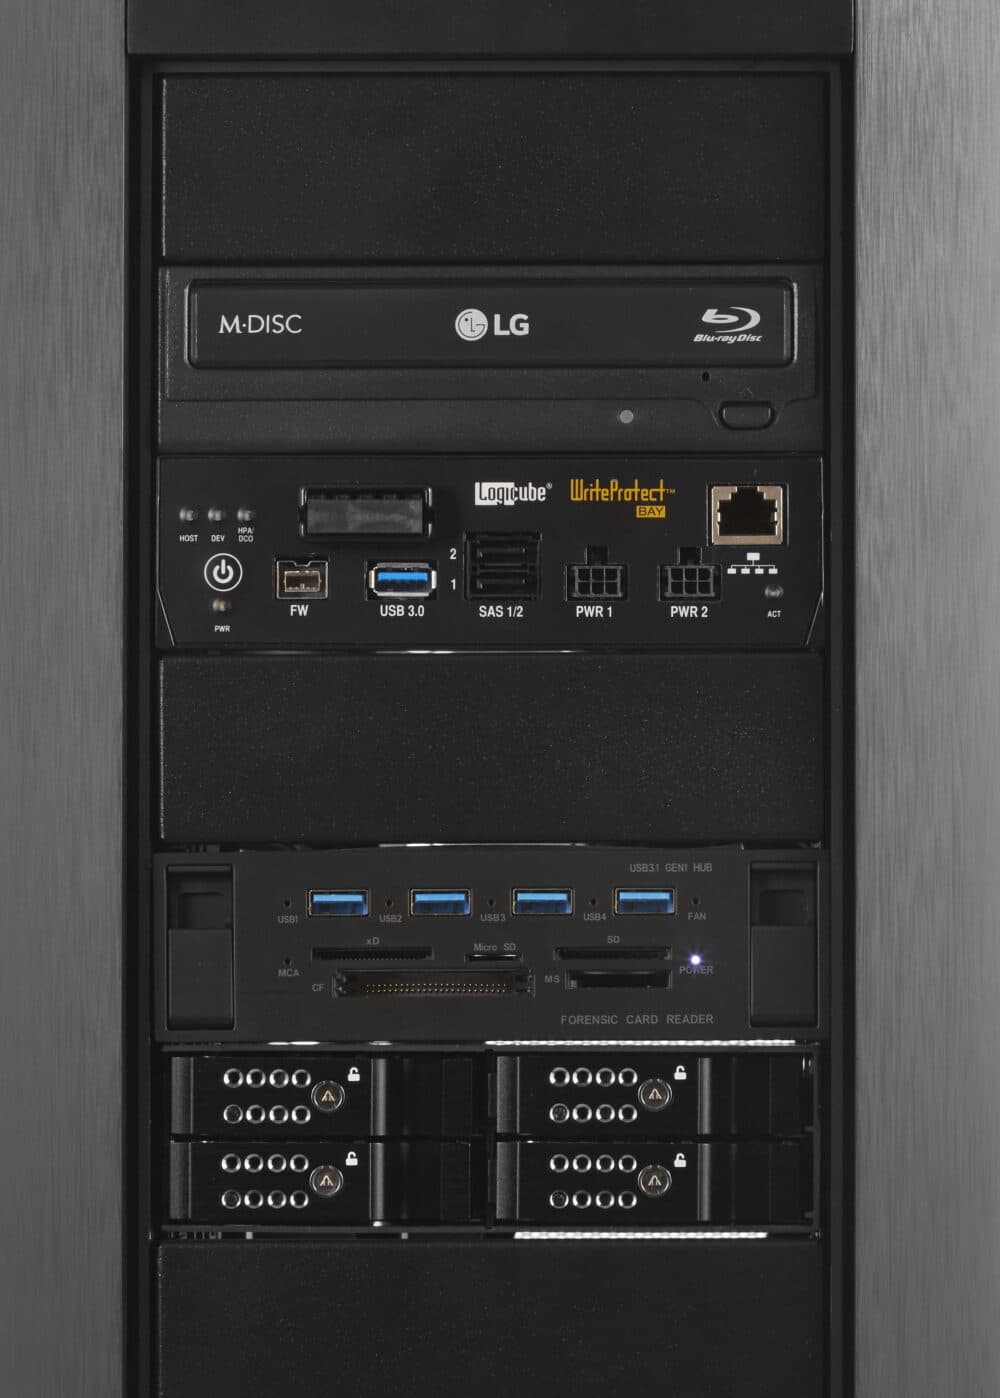 A black desktop computer with two hard drives and a monitor.